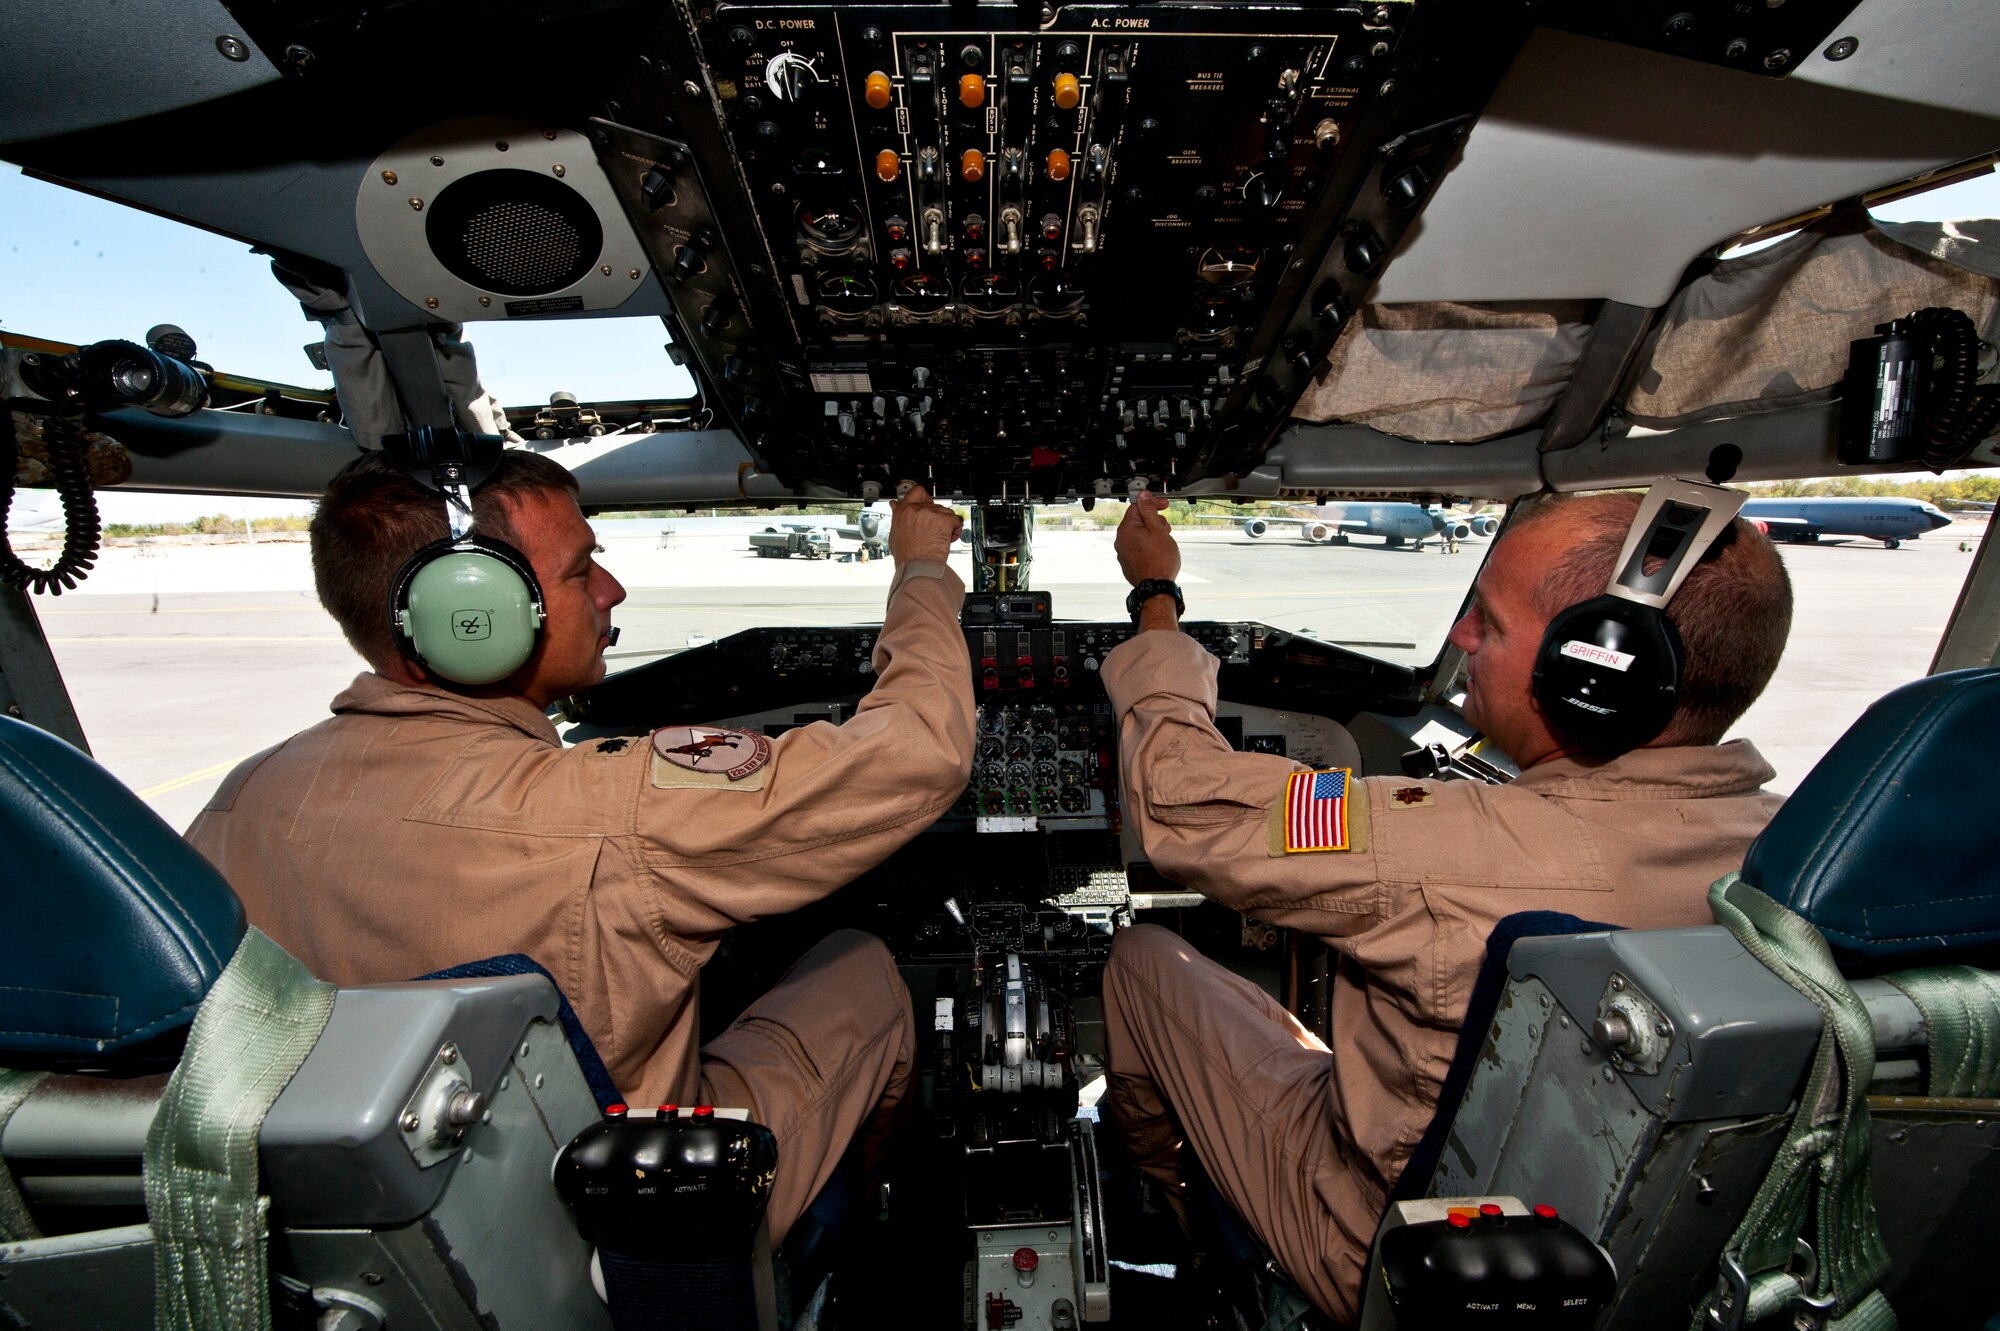 Left, Lt. Col. Aaron Wardlaw and Maj. Jody Griffin conduct pre-flight checks in a KC-135 Stratotanker at the Transit Center at Manas, Kyrgyzstan, Aug. 31, 2012. The 22nd Expeditionary Air Refueling Squadron KC-135 crew assisted a stricken fighter aircraft by guiding the jet through a series of specific maneuvers to reset the on-board flight computers and allowing the pilot to regain effective communications and navigational instruments. Wardlaw is a 22 EARS aircraft commander deployed out of the 137th Air Refueling Wing, Oklahoma Air National Guard, and a native of Stillwater, Okla. Griffin is a KC-135 pilot deployed out of the 137 ARW and a native of Greenville, Miss. (U.S. Air Force photo/Senior Airman Brett Clashman)